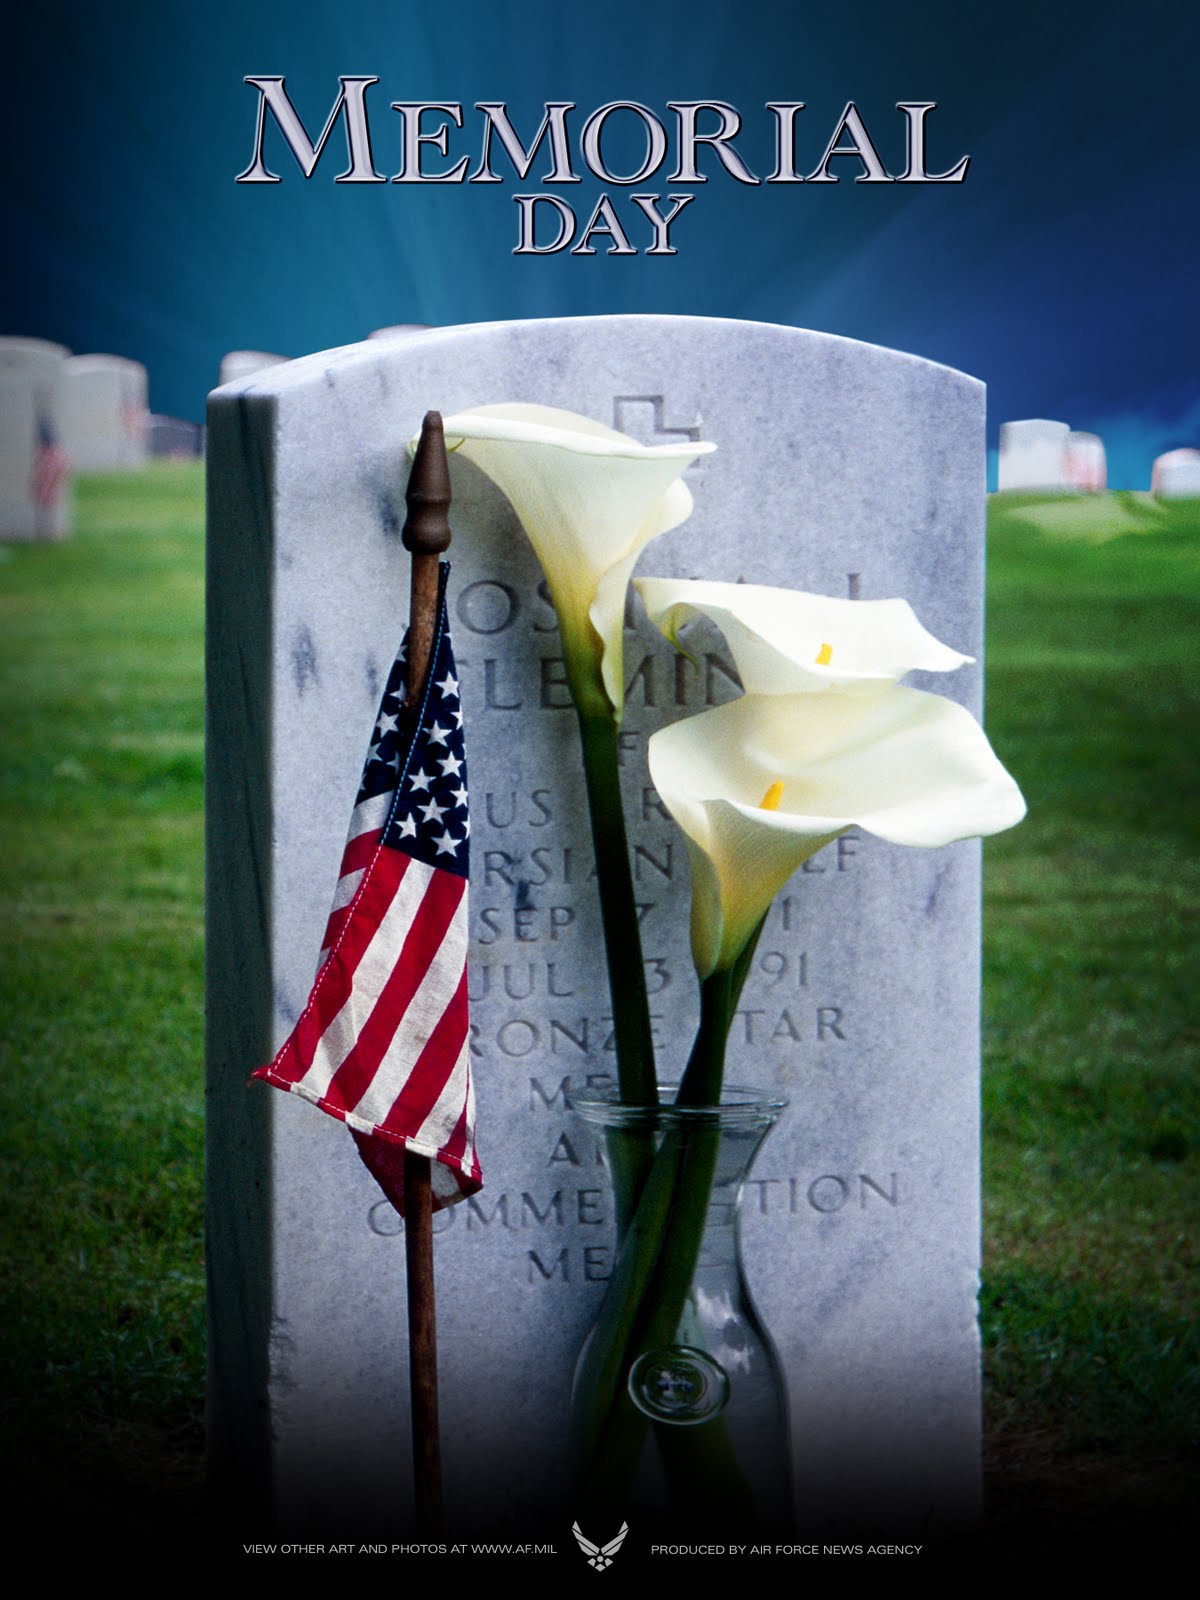 Free Memorial Day Powerpoint Backgrounds Download   Powerpoint Tips